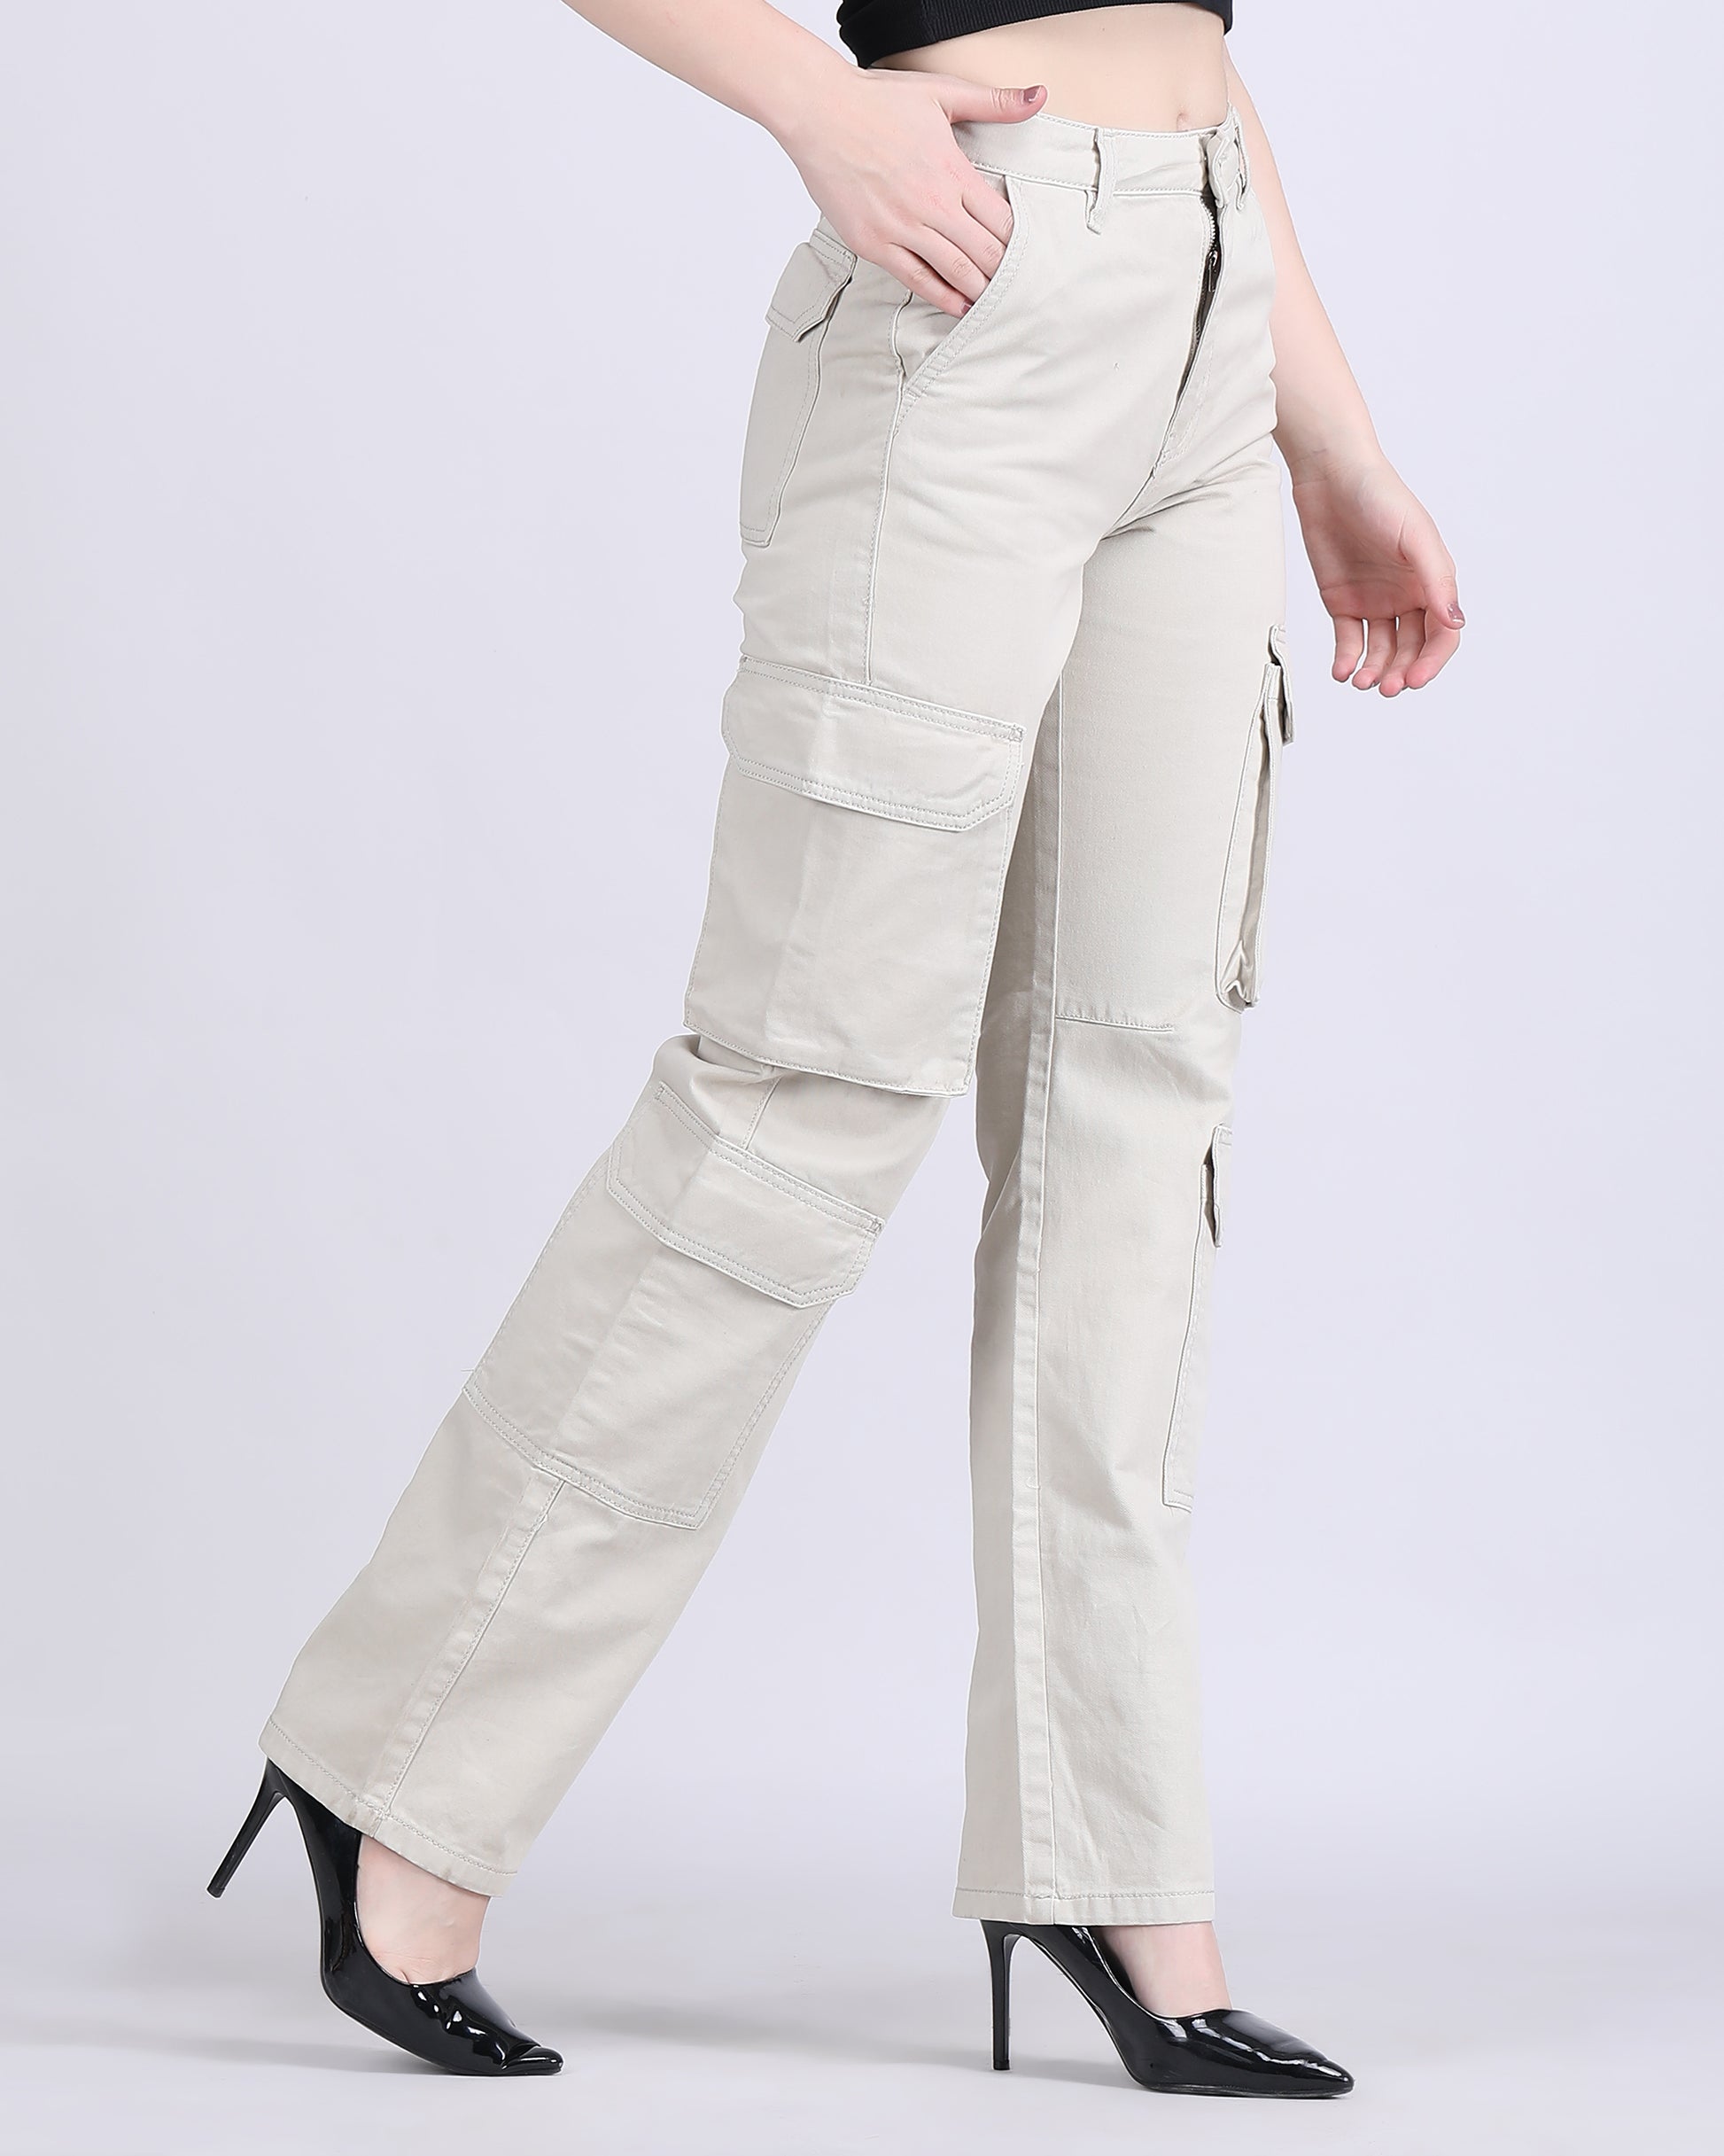 STRAIGHT FIT CARGO,beige, bottomwear, cargos, cotton, full length, mid rise waist, straight fit, utility pocket,cargo-straight-fit-trouser-beige,Length - Full lengthWaist - Mid-rise waistFit - Straight fitColor - CreamNo. of Pockets - 8Material - Cotton twillLength - 42 inchClosure - Zip &amp; button Detail - Utility-pocket